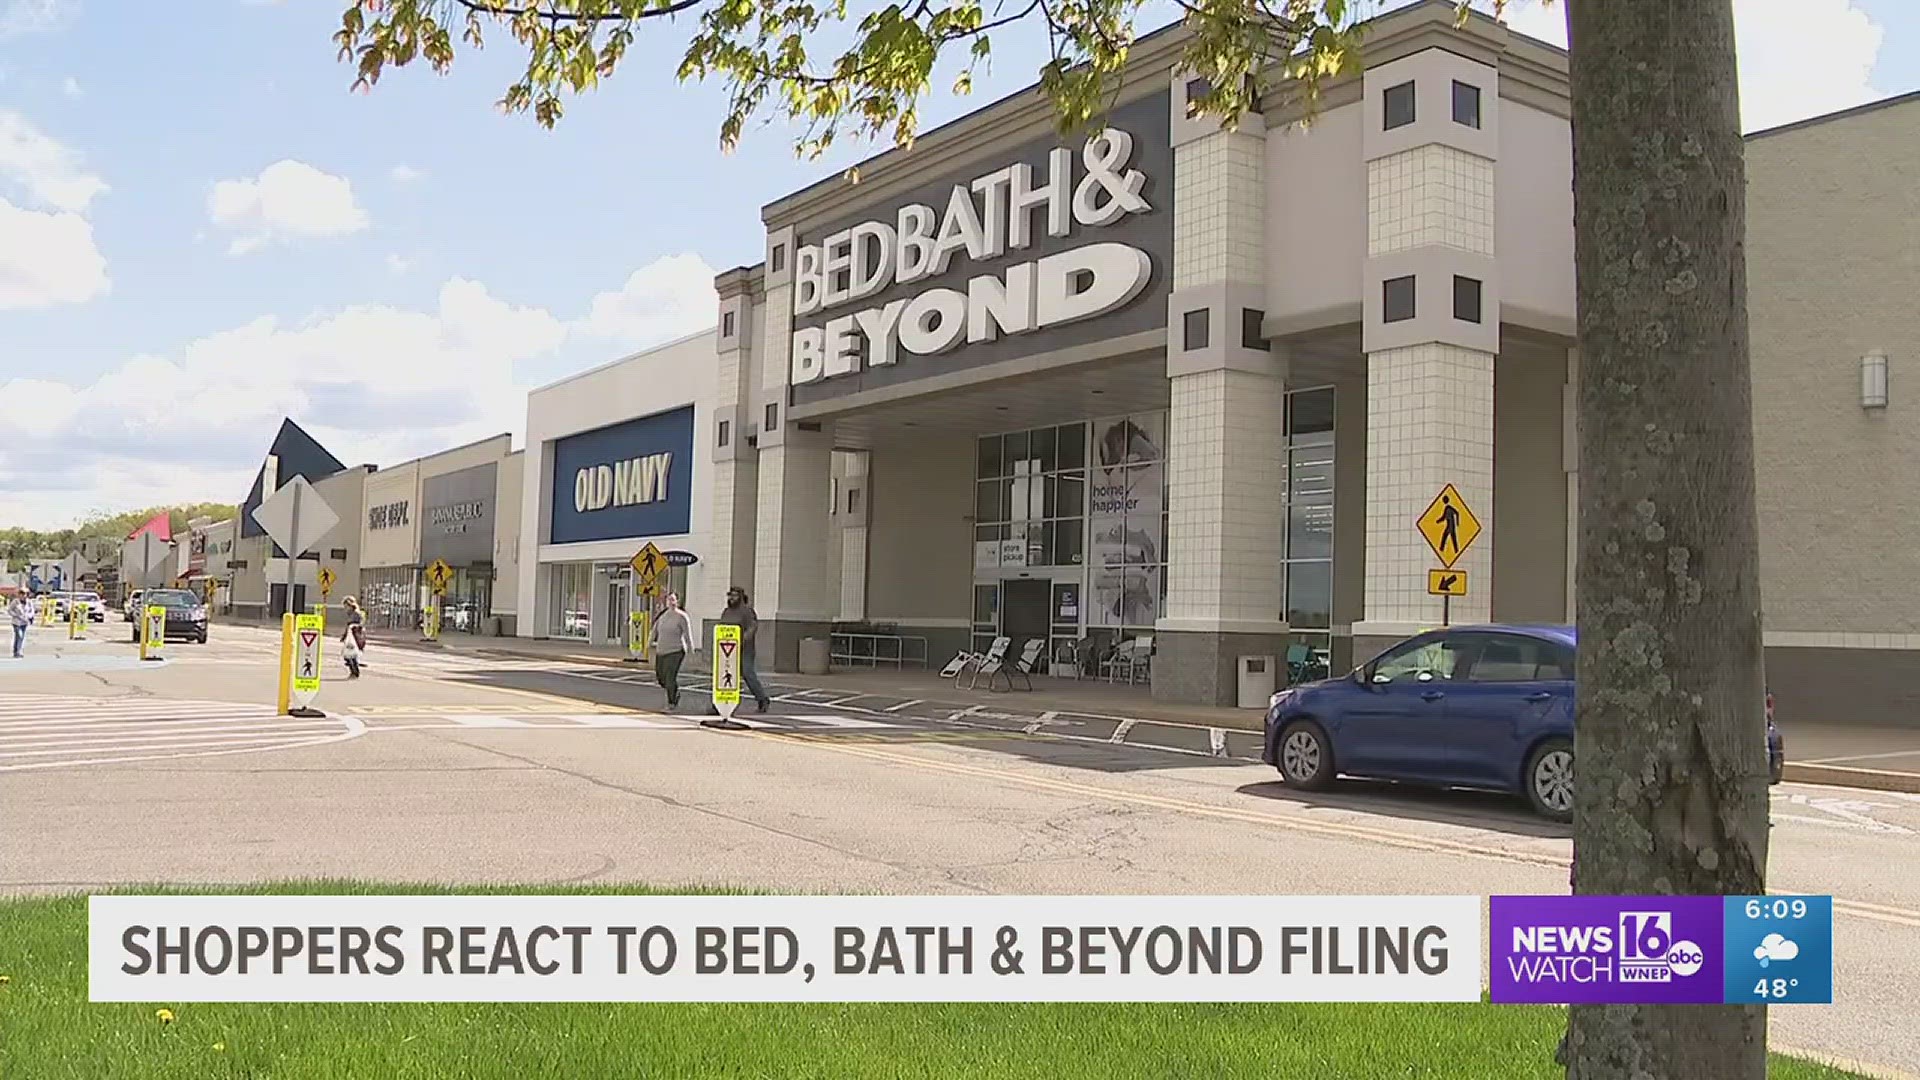 If you have coupons for Bed Bath & Beyond, now is the time to use them. The company filed for bankruptcy and expects to close all its stores in the coming months.